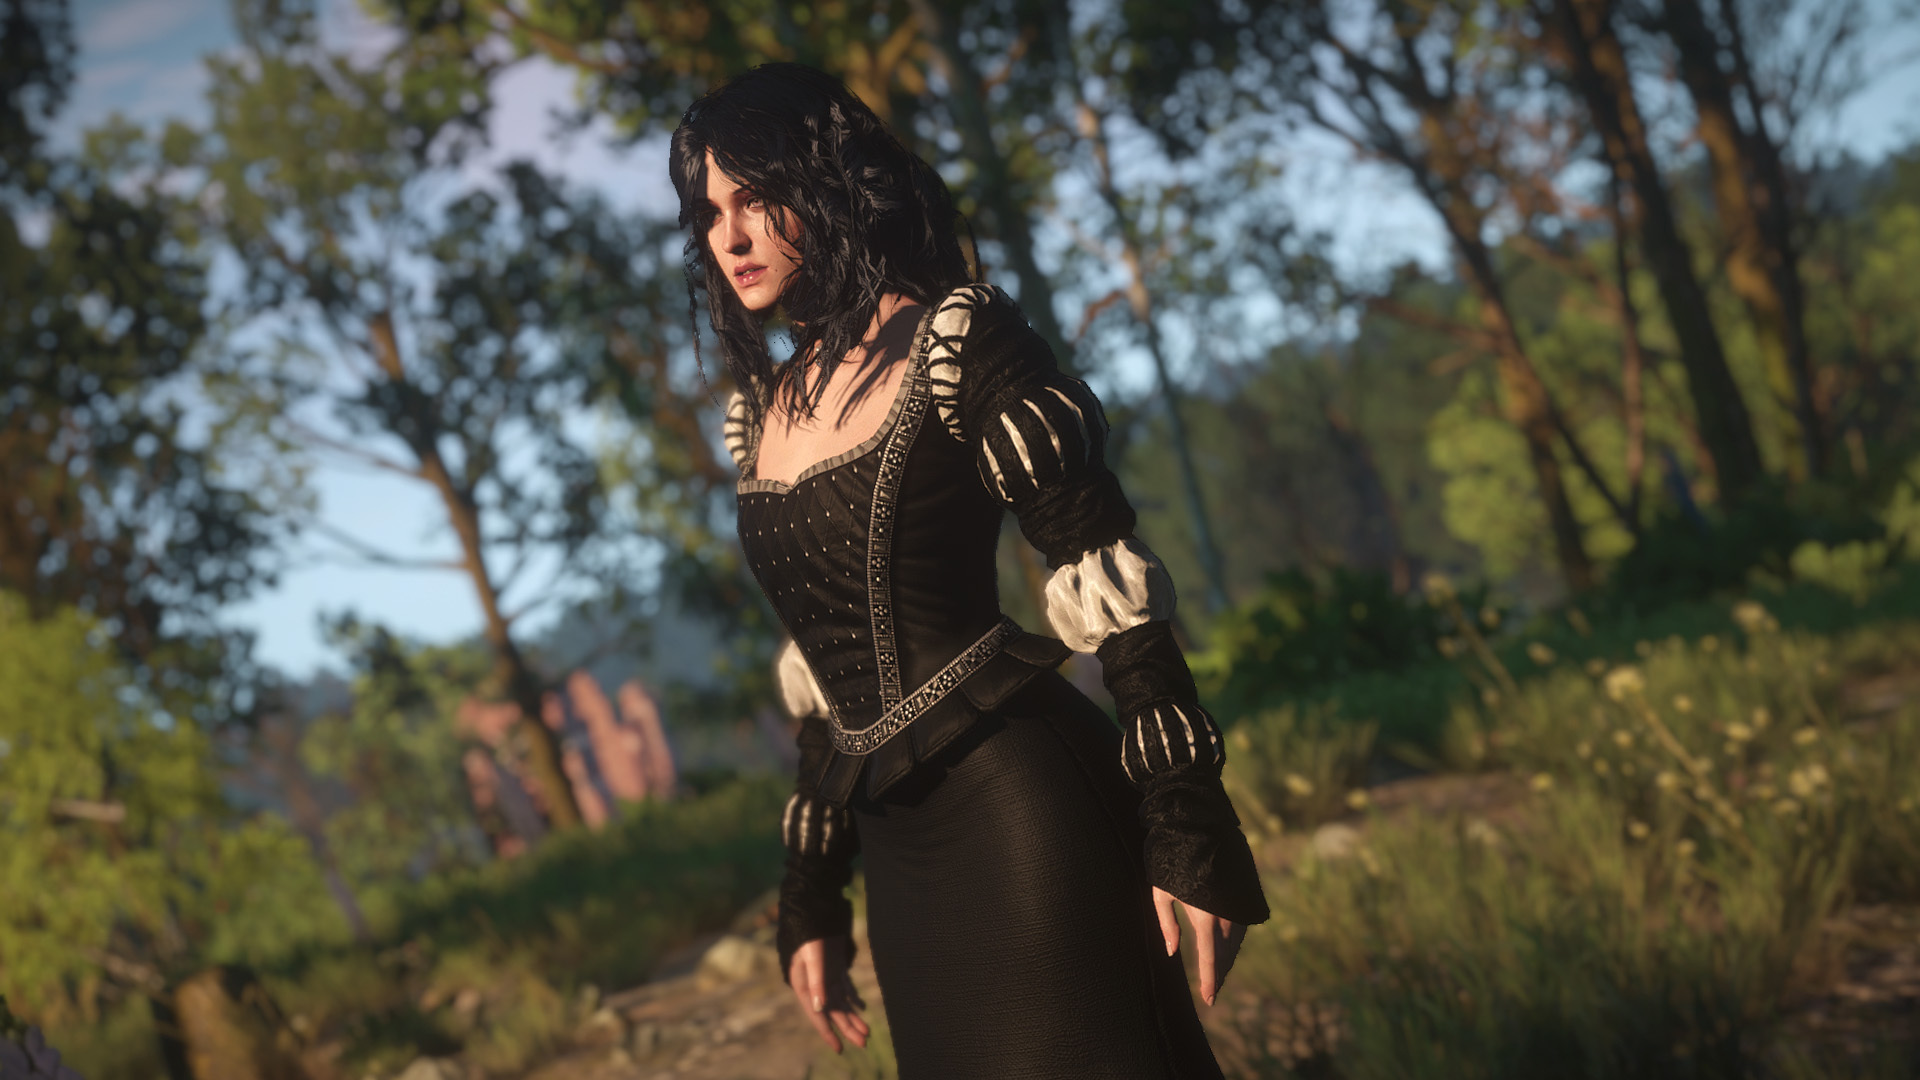 Yennefer of vengerberg the witcher 3 voiced standalone follower фото 46